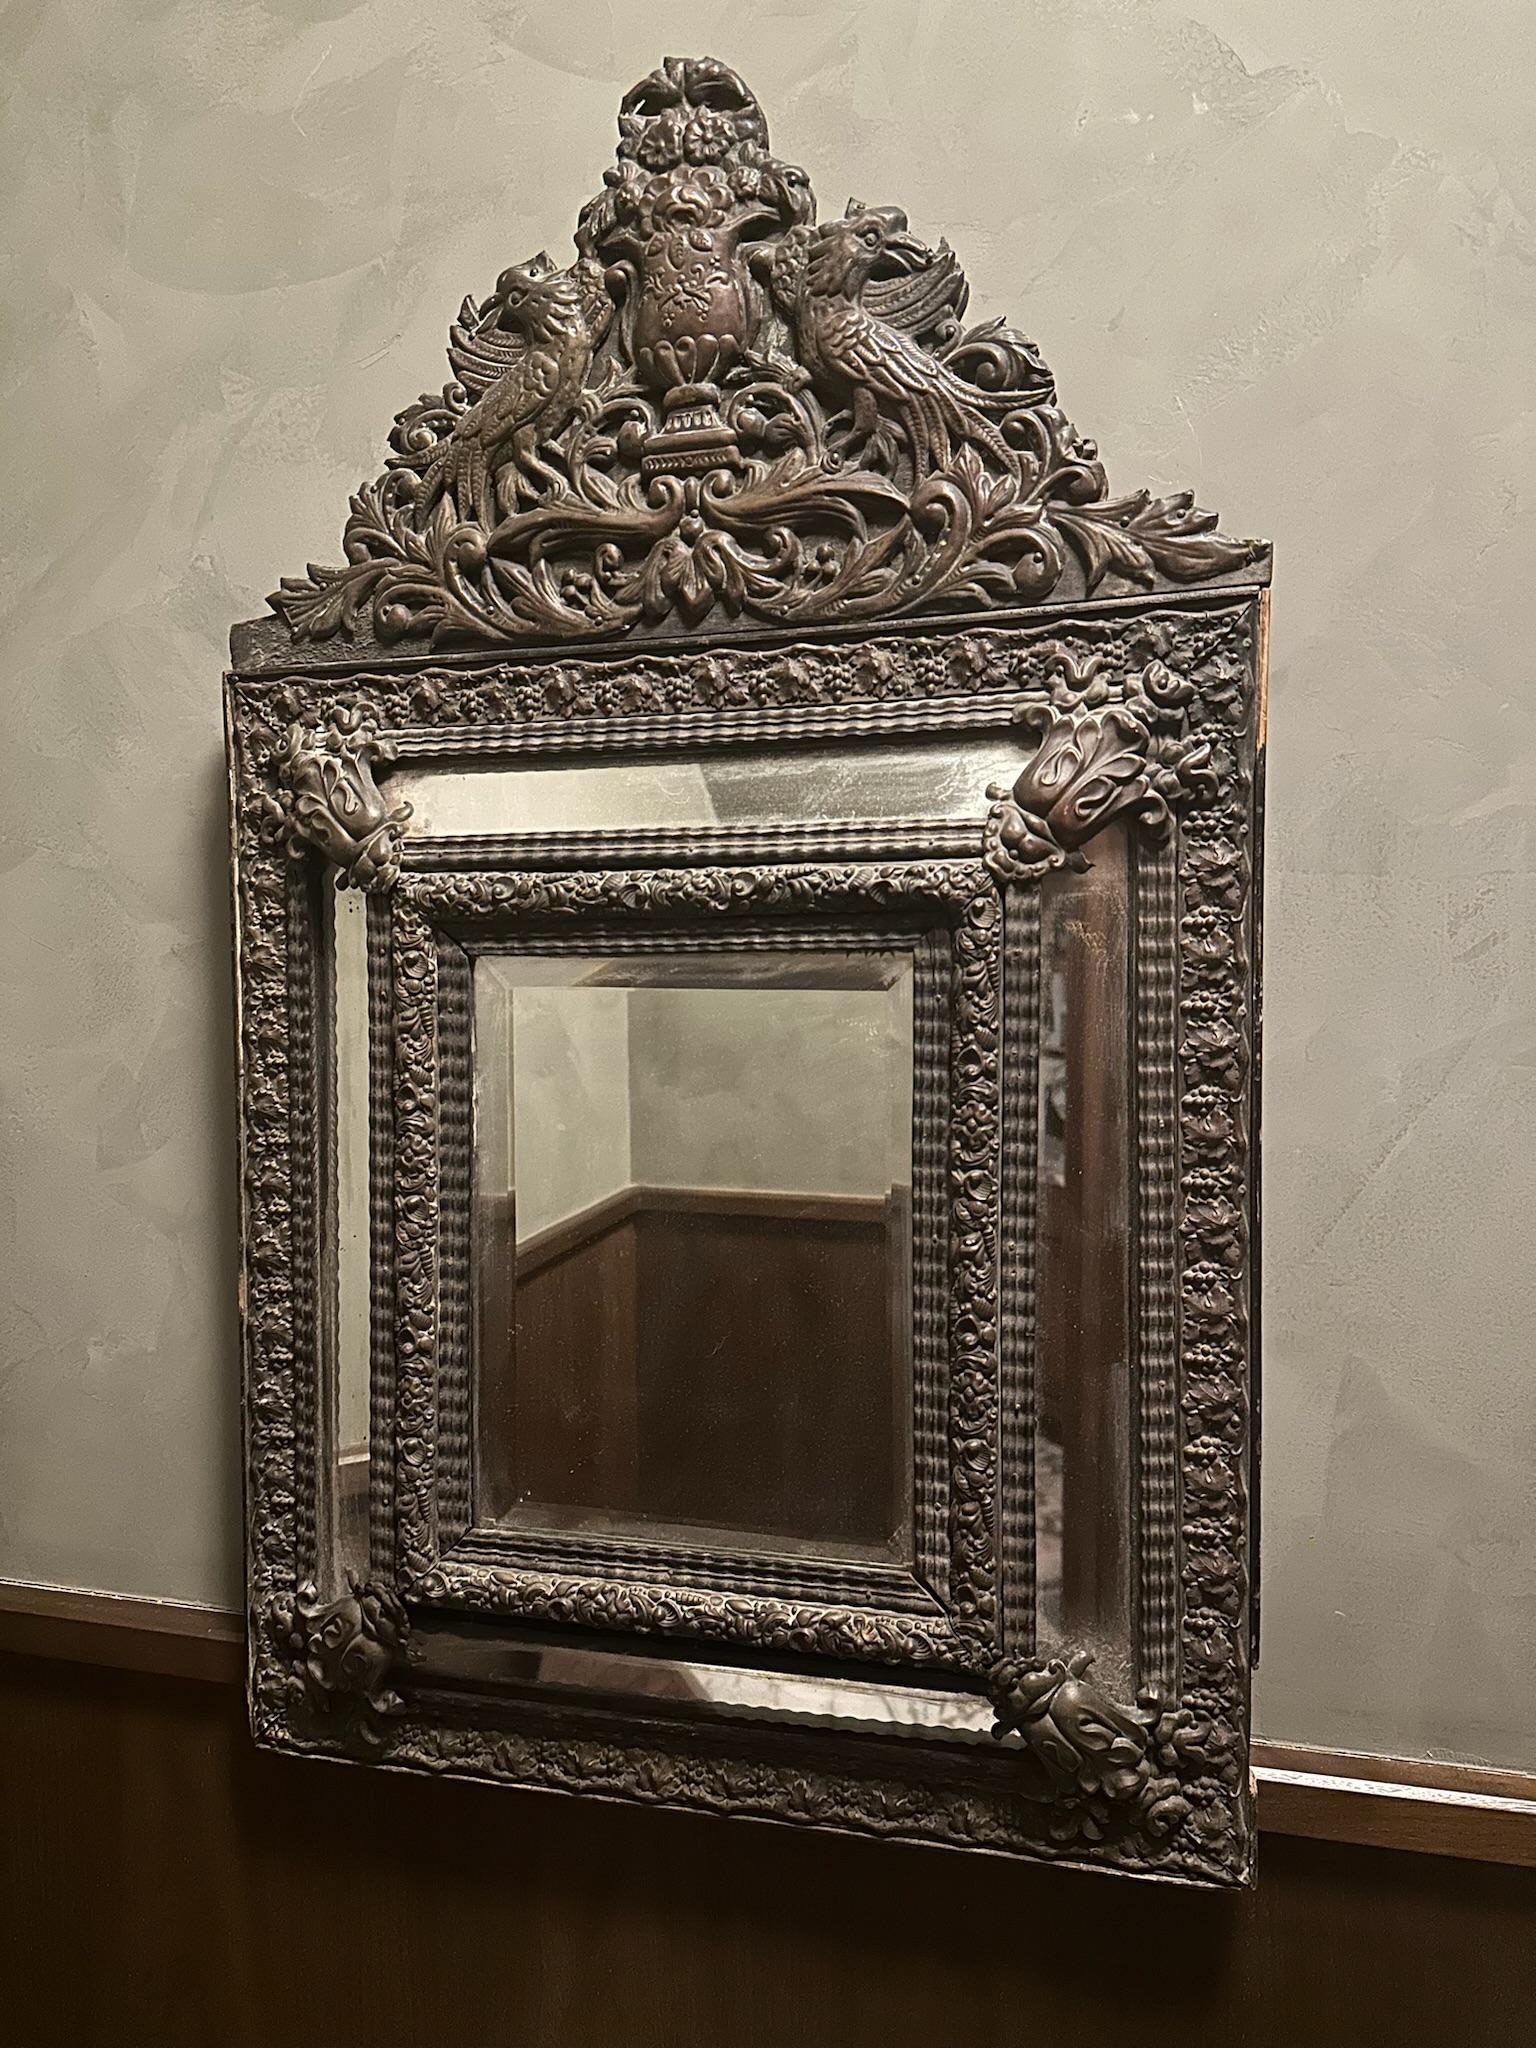 Late 19th-century French mirror. The frame of the mirror is decorated with flowers and shells pressed into sheet copper. The back of the mirror is supported with wood. Featuring one main mirror bordered by narrow mirror insets above, below, and at